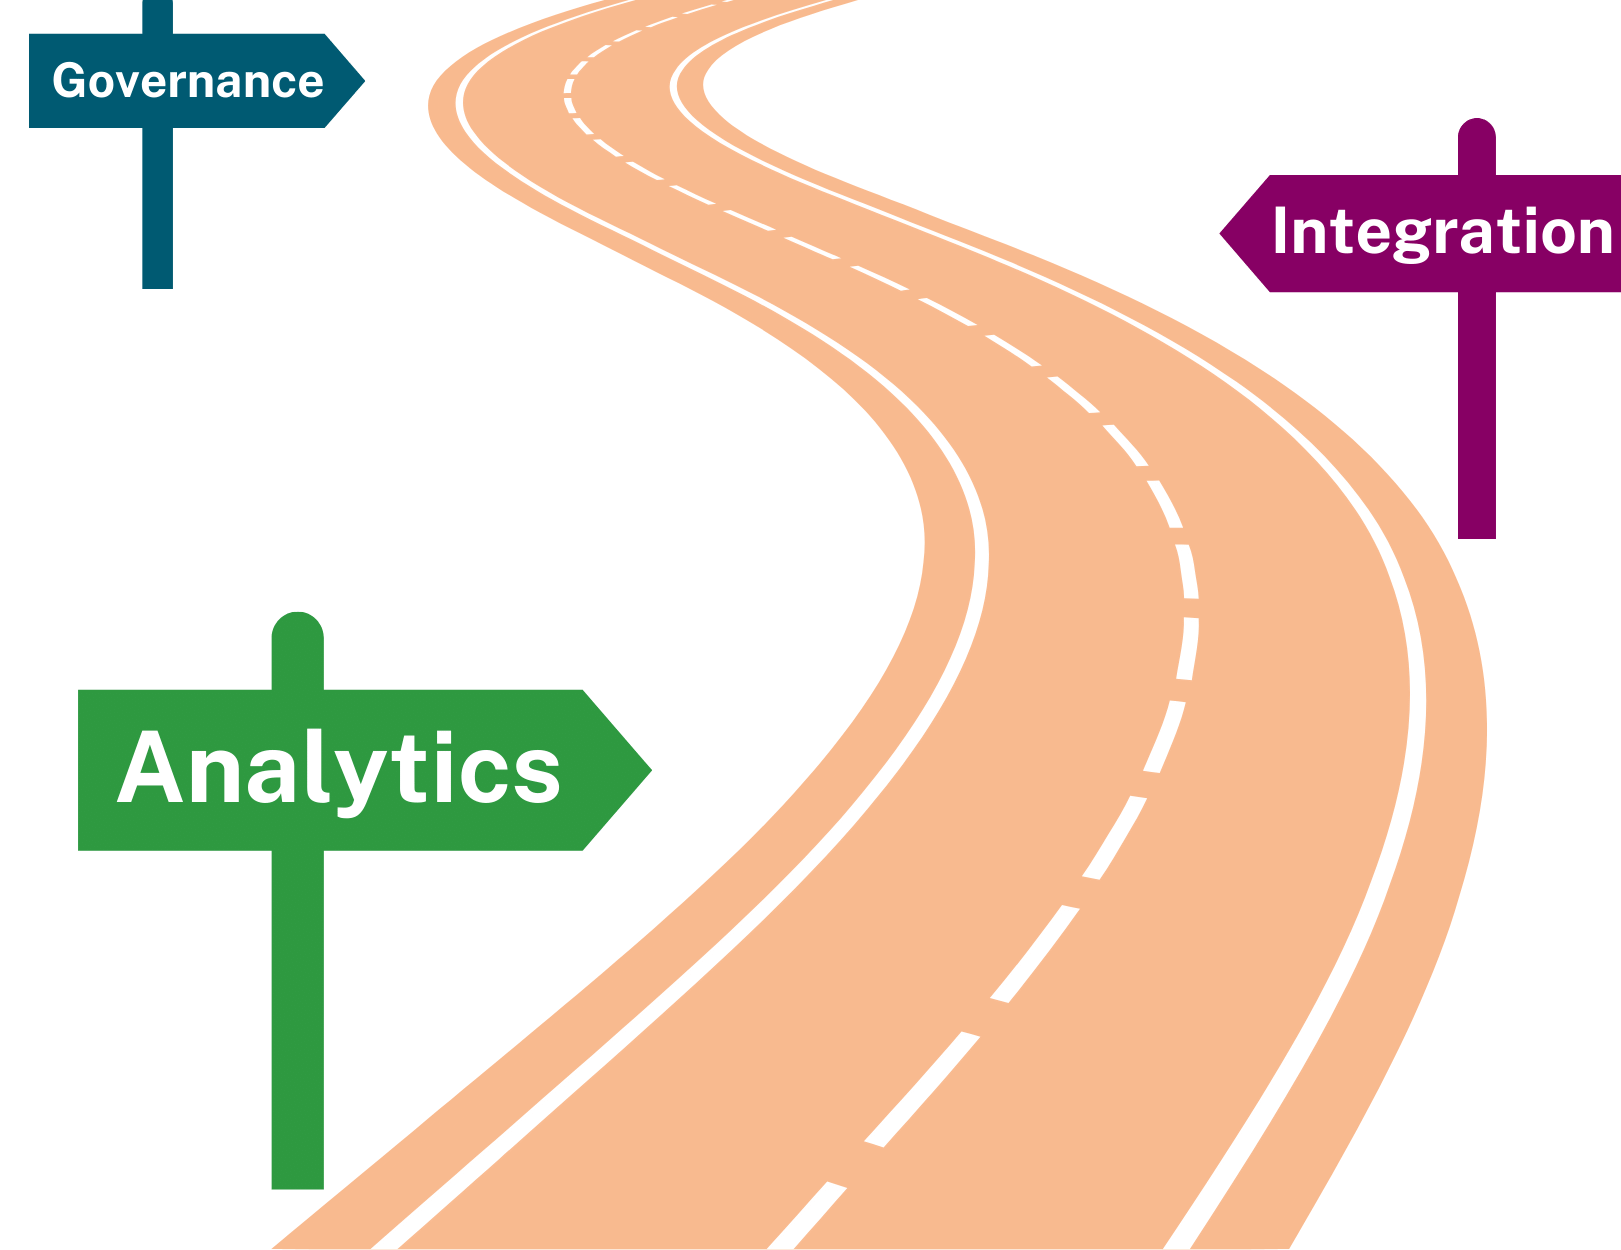 Accelerate your data journey with Ometis and Qlik